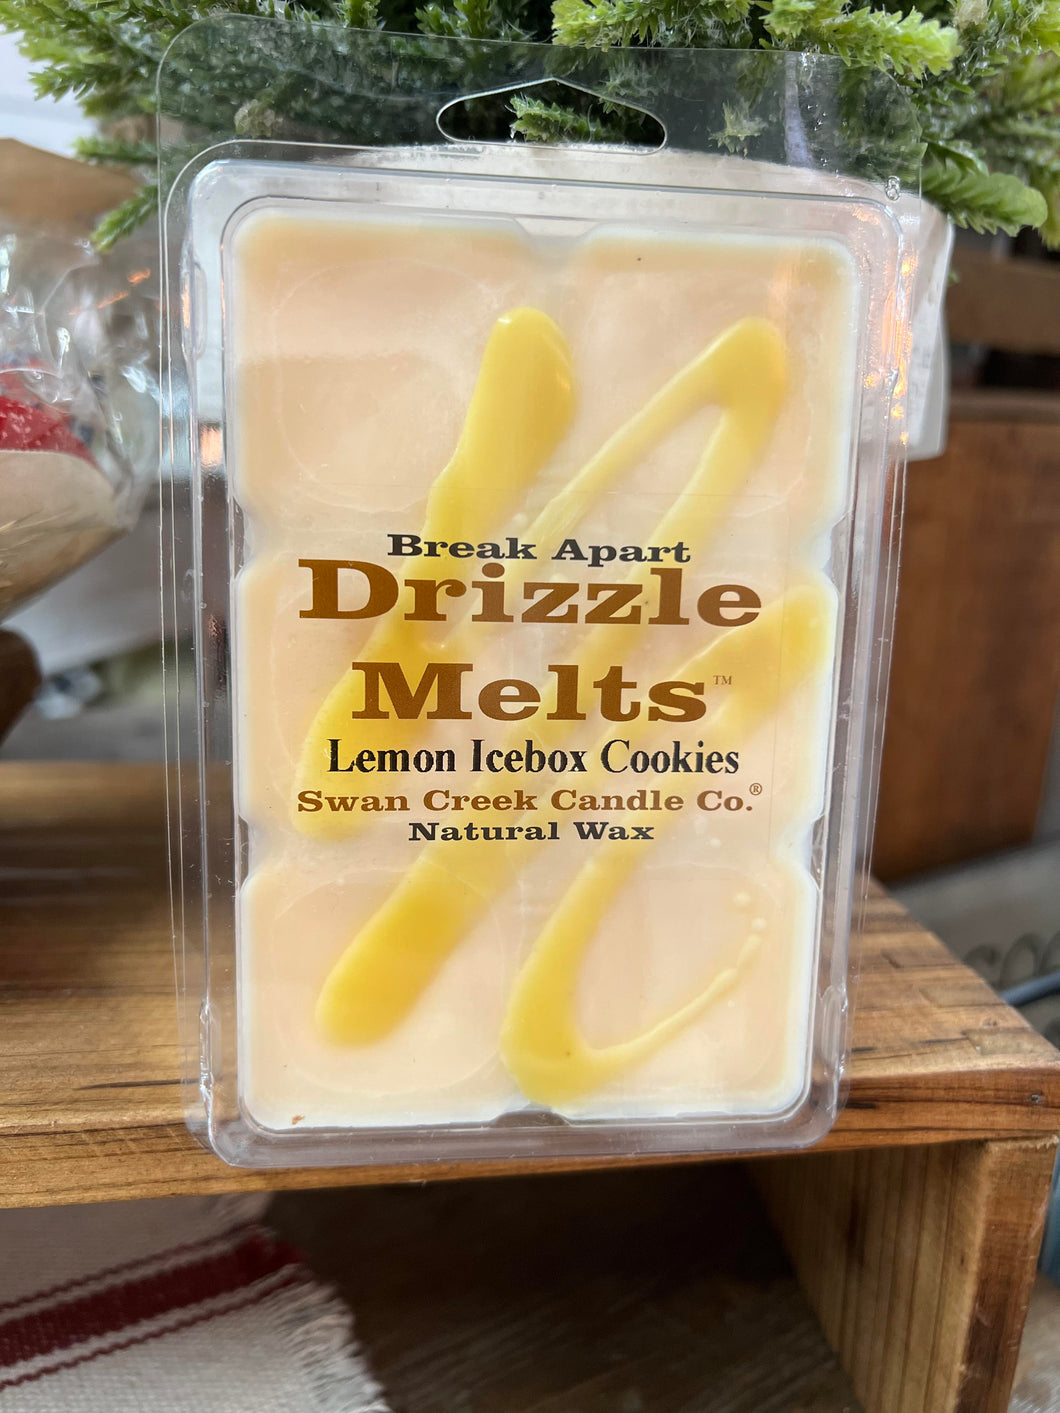 Swan Creek Candle Co. Lemon Icebox Cookies Drizzle Melts